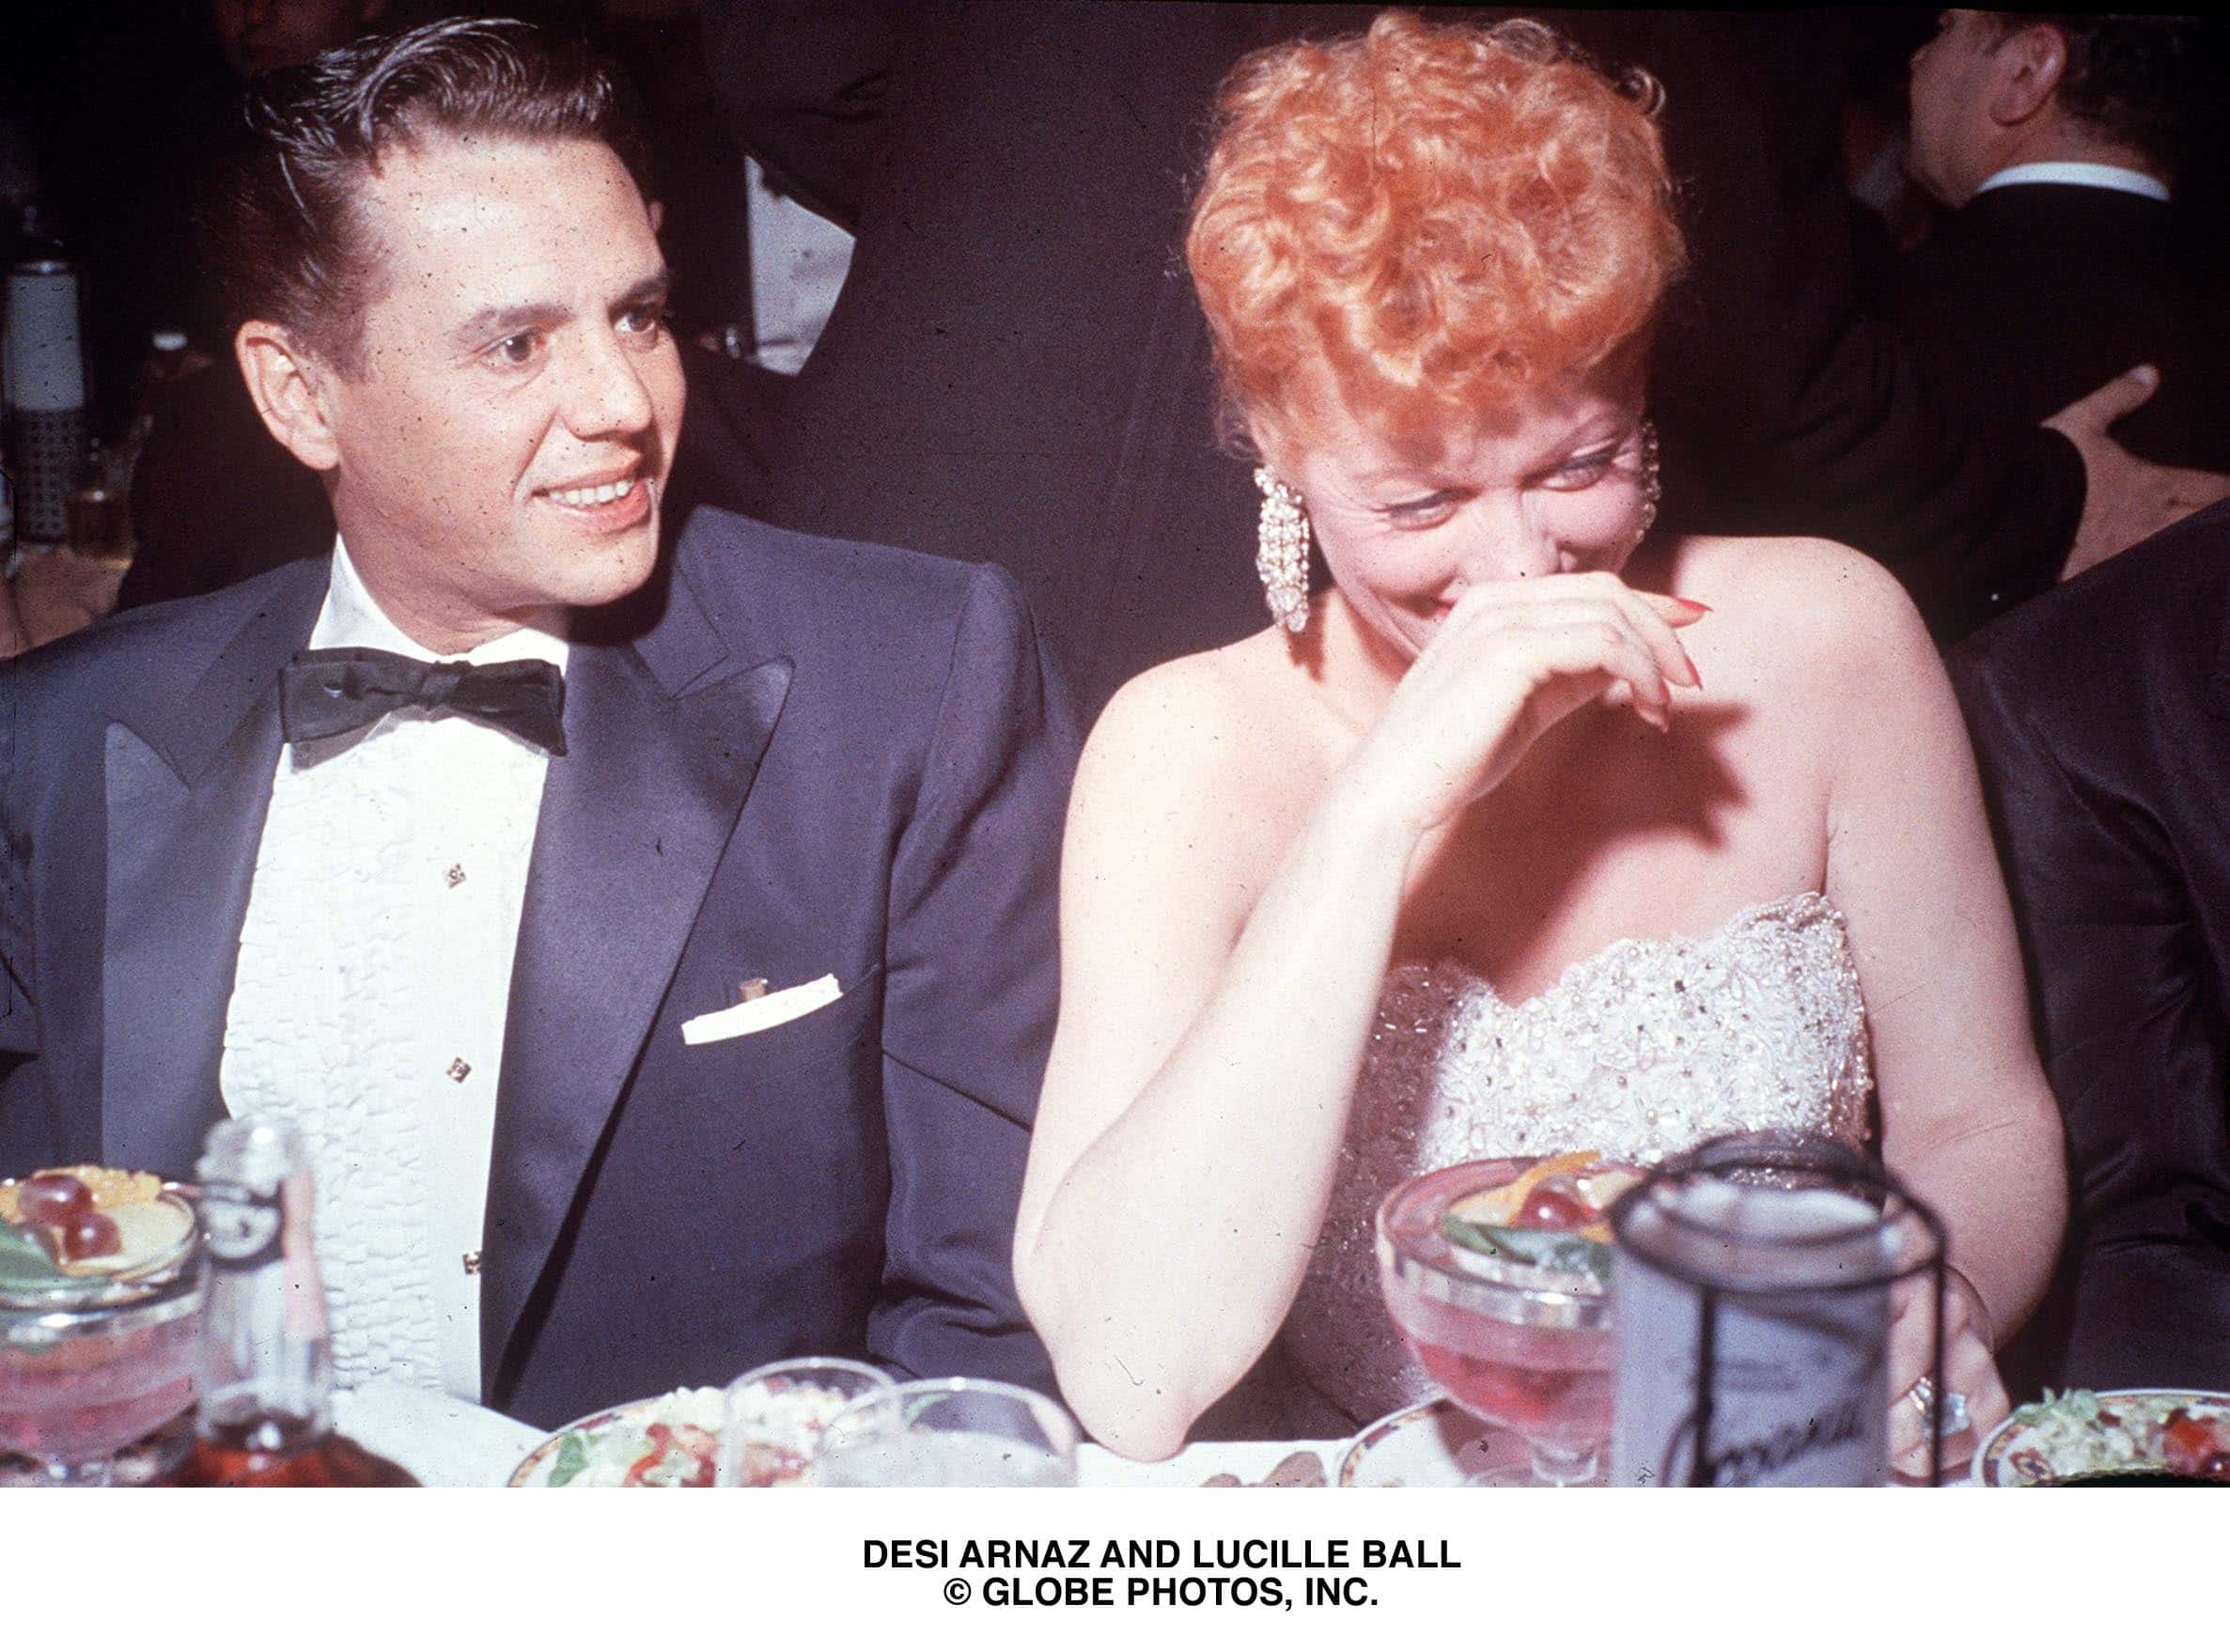 Only Lucille Ball Was Allowed To Mock Desi Arnaz's Accent On The Show